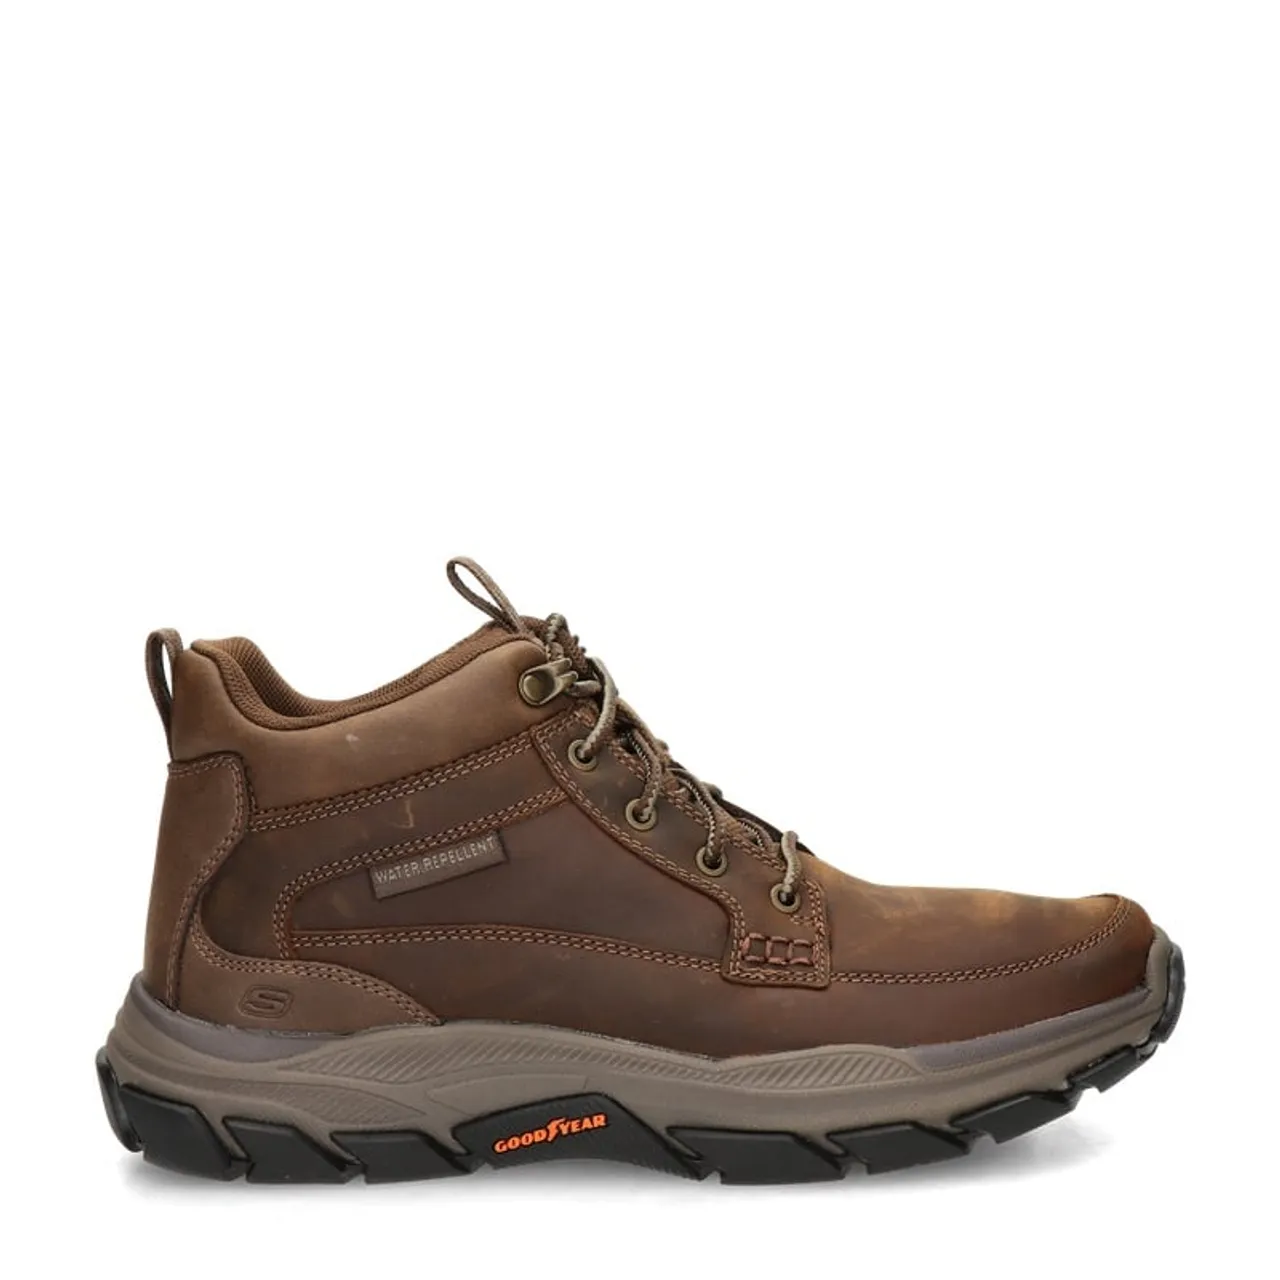 Skechers Boswell Relaxed Fit veterboots